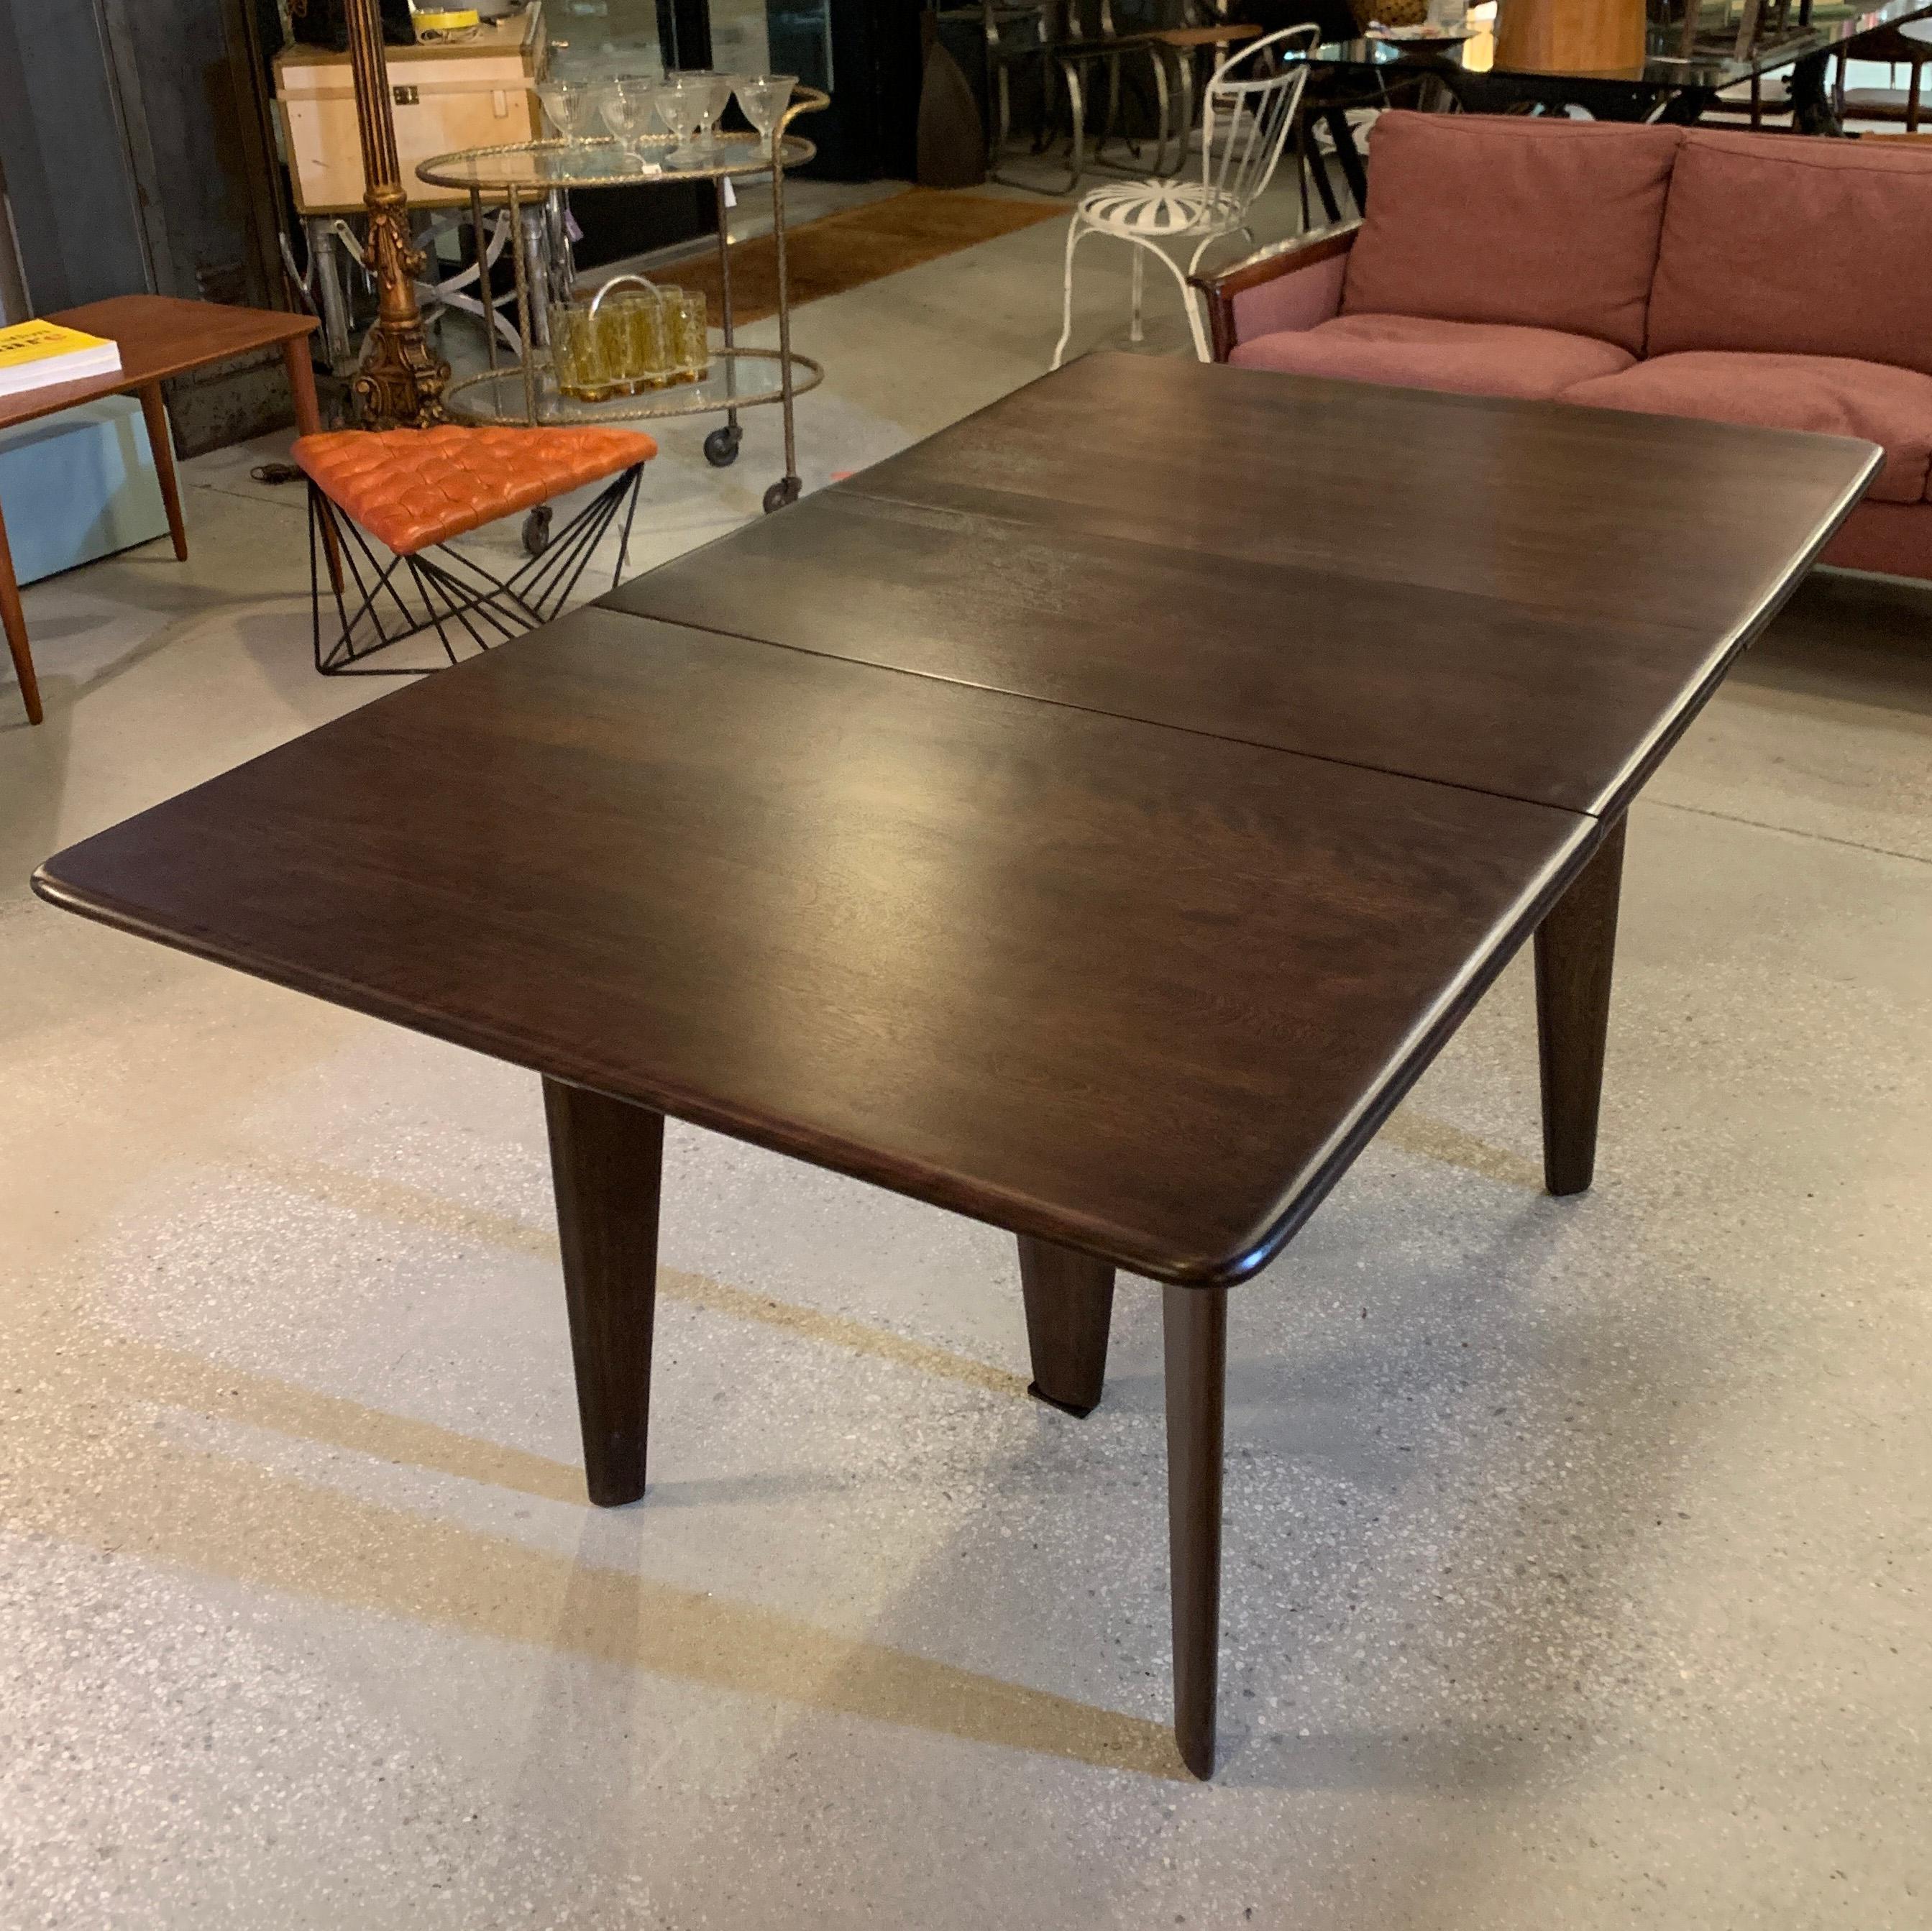 Mid-Century Modern, maple, gate fold, drop leaf, dining table by Heywood Wakefield in an ebonized finish, can be used with one or both leaves up and folds down to a 15 inch wide console that can easily be tucked away.